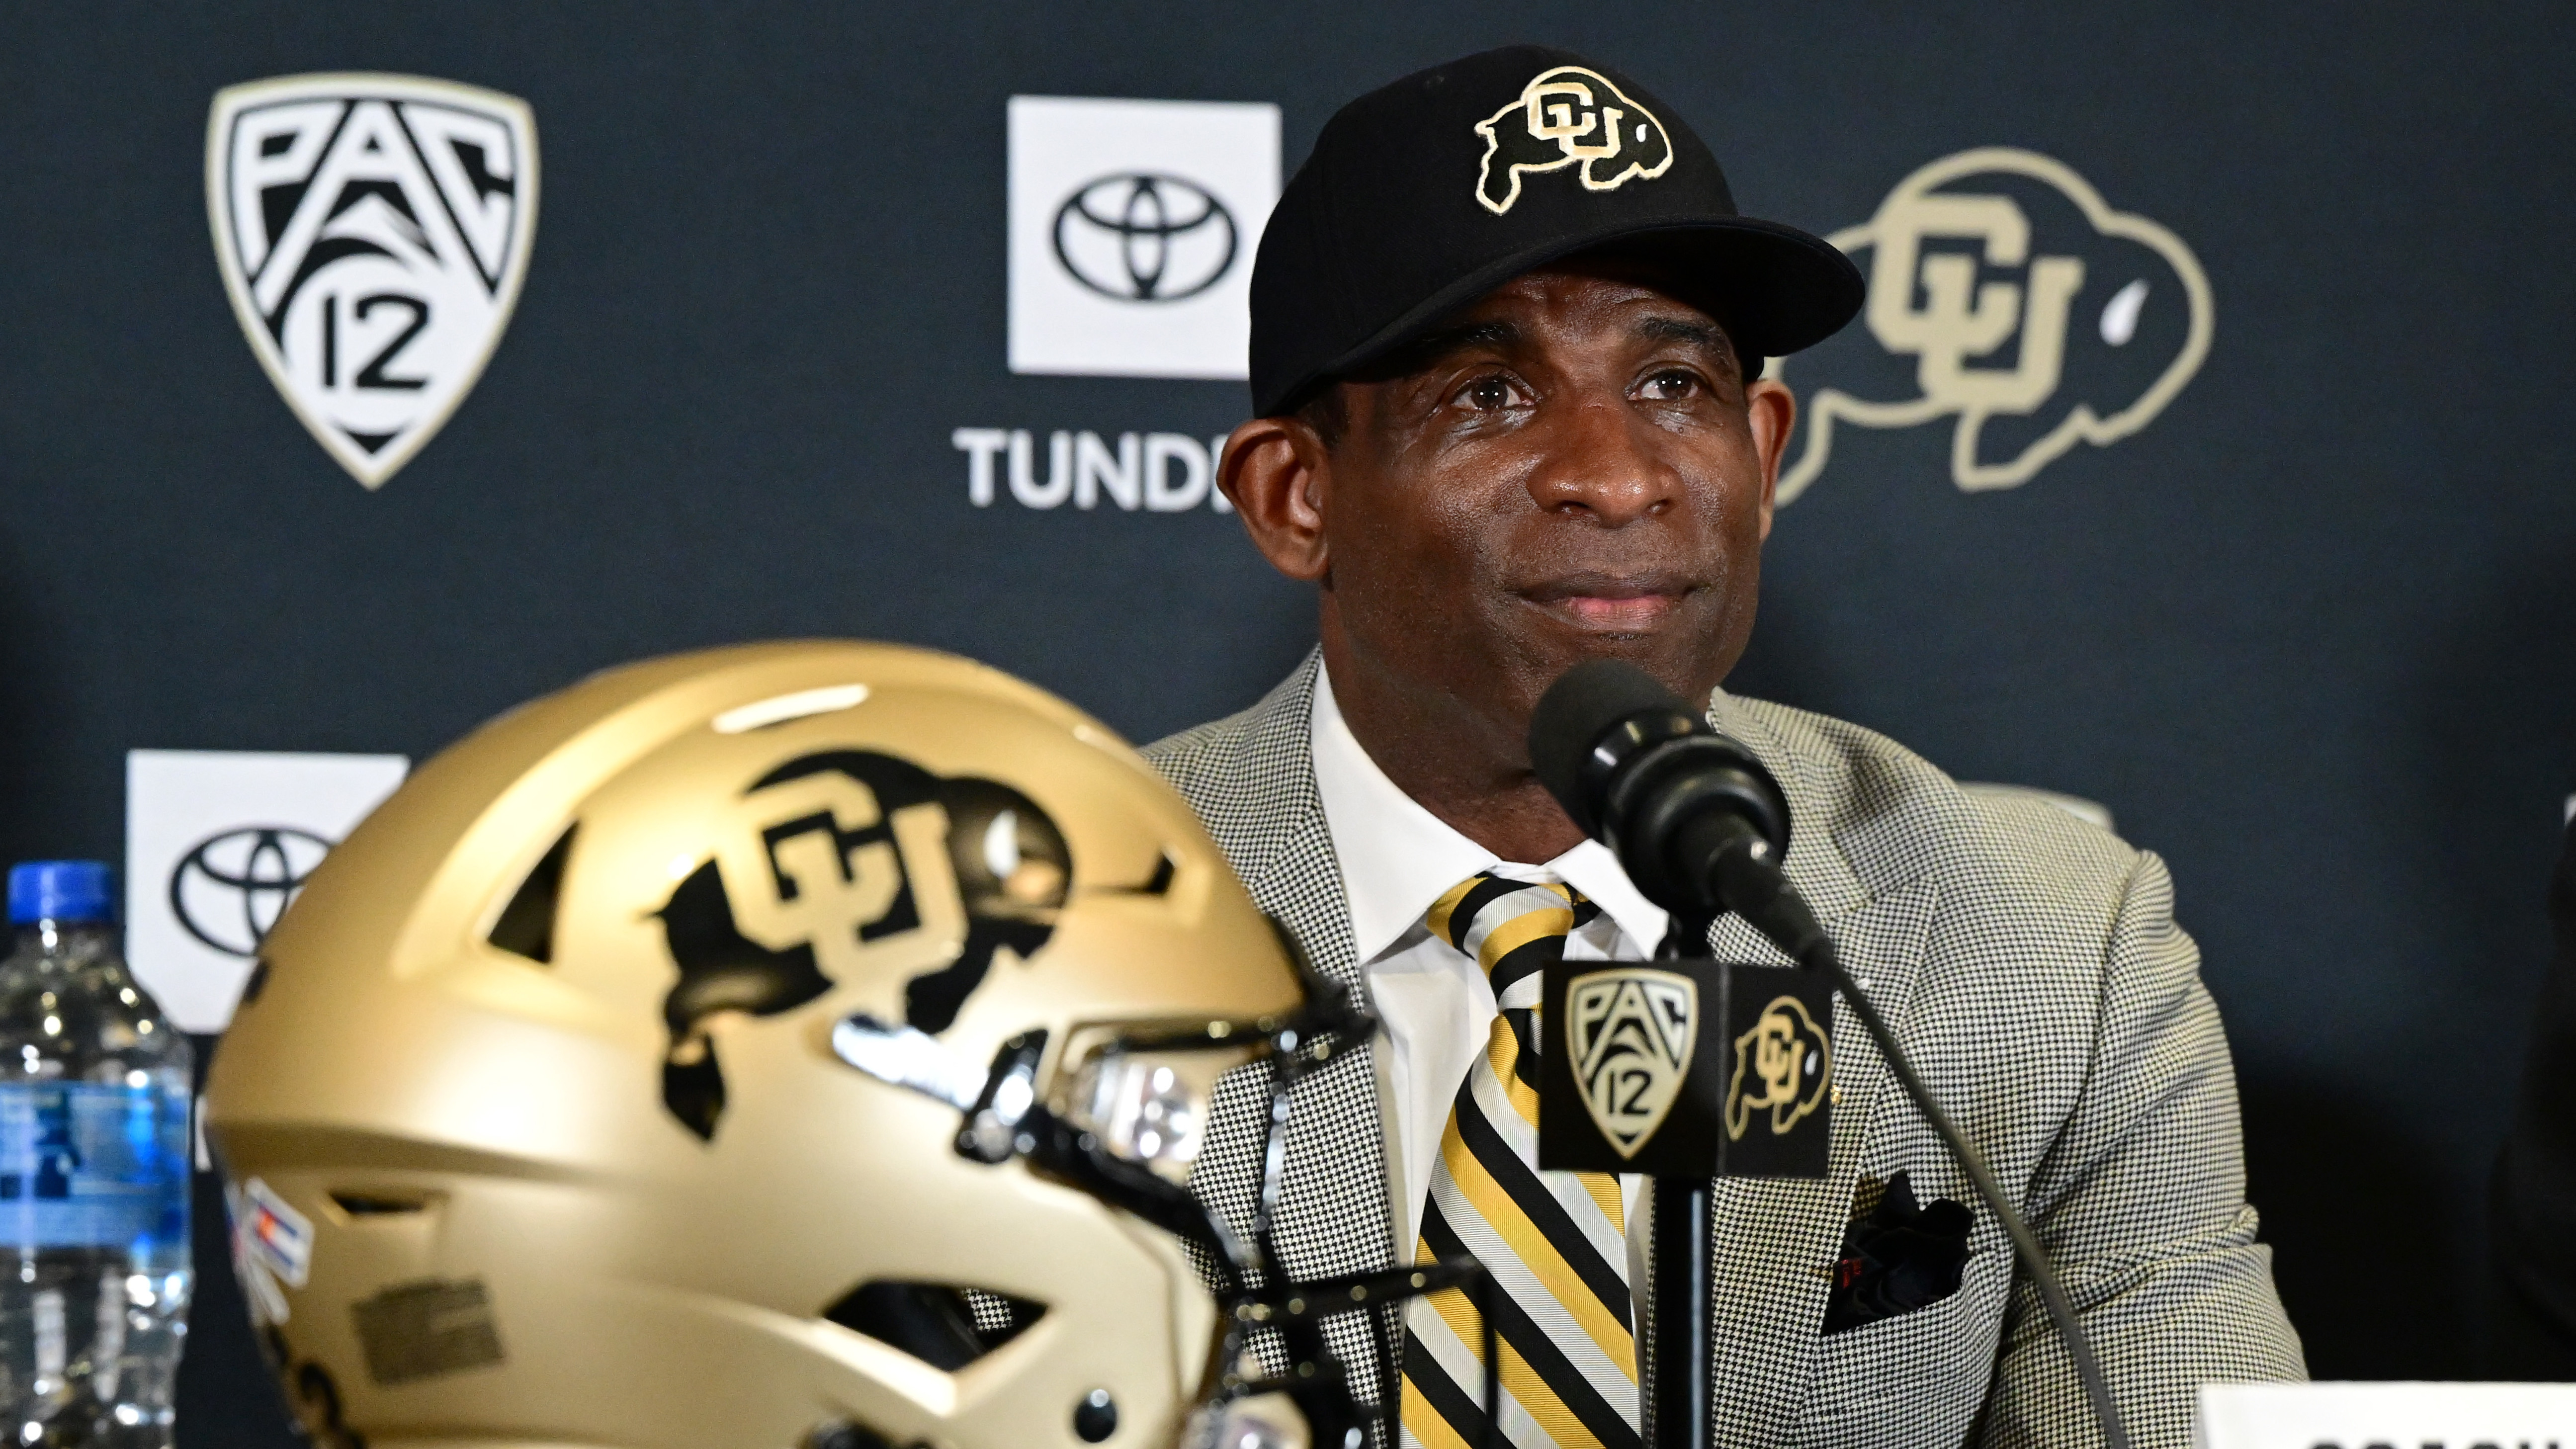 Deion Sanders elevated Jackson State, and next coach must keep